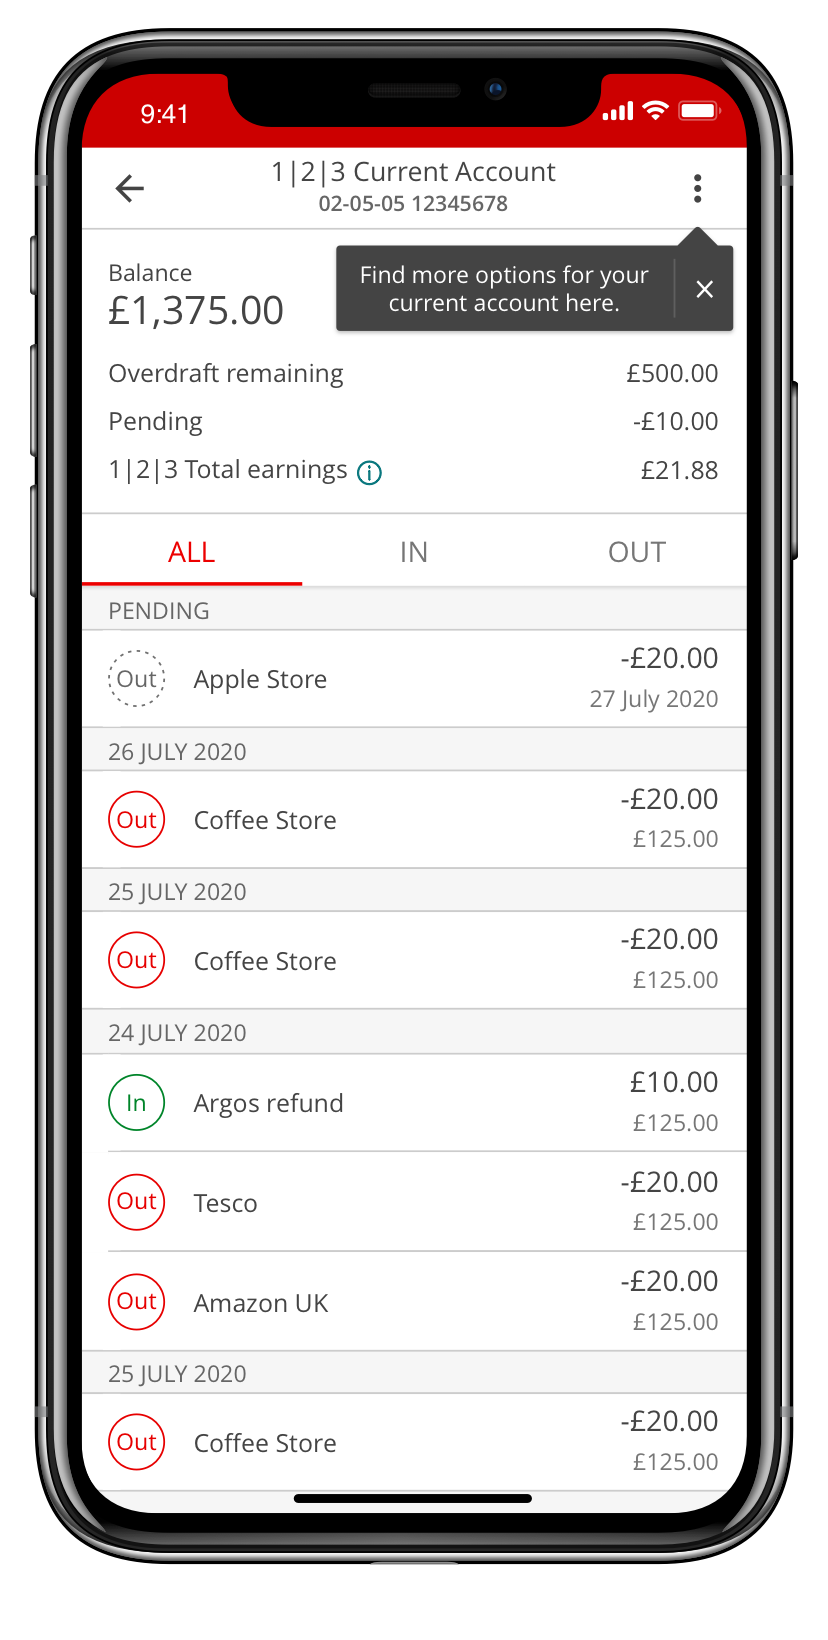 Santander Mobile Banking current account more options